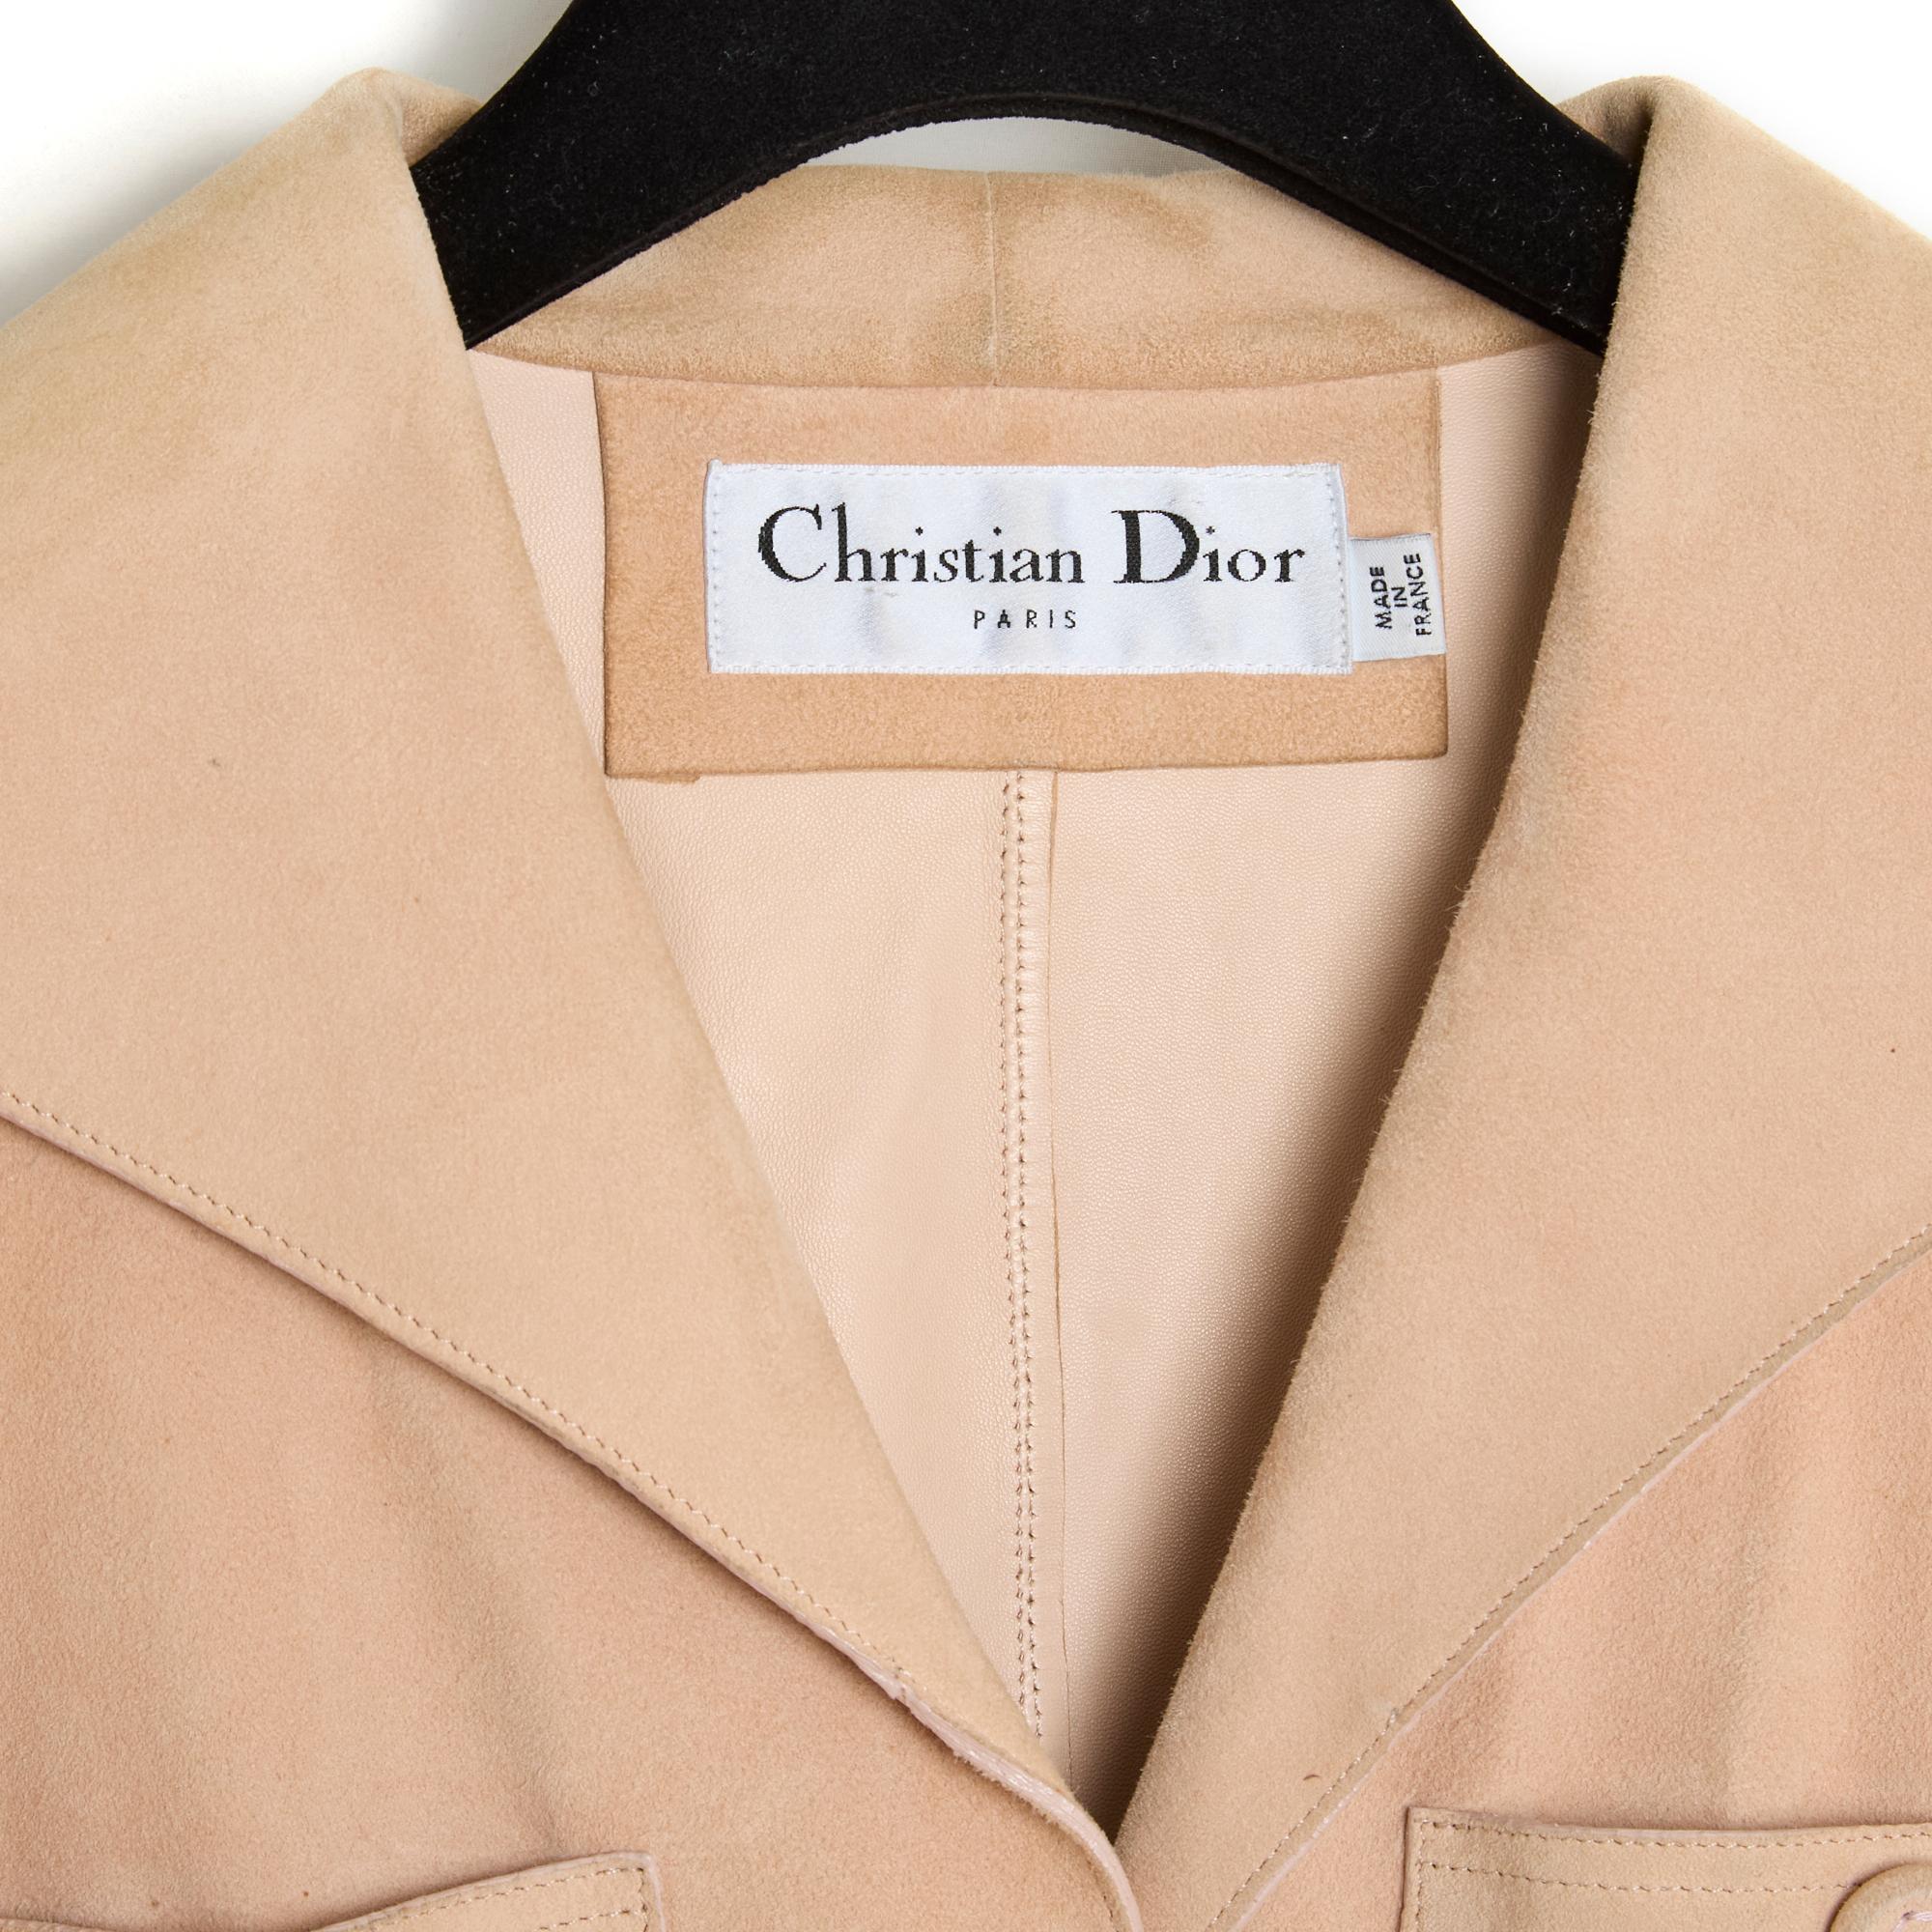 Christian Dior jacket from the Cruise 2000 collection by John Galliano in soft, slightly pinkish beige suede, flared collar closed with 3 buttons covered in coordinated suede, 4 patch pockets decorated with a large button, long sleeves also closed